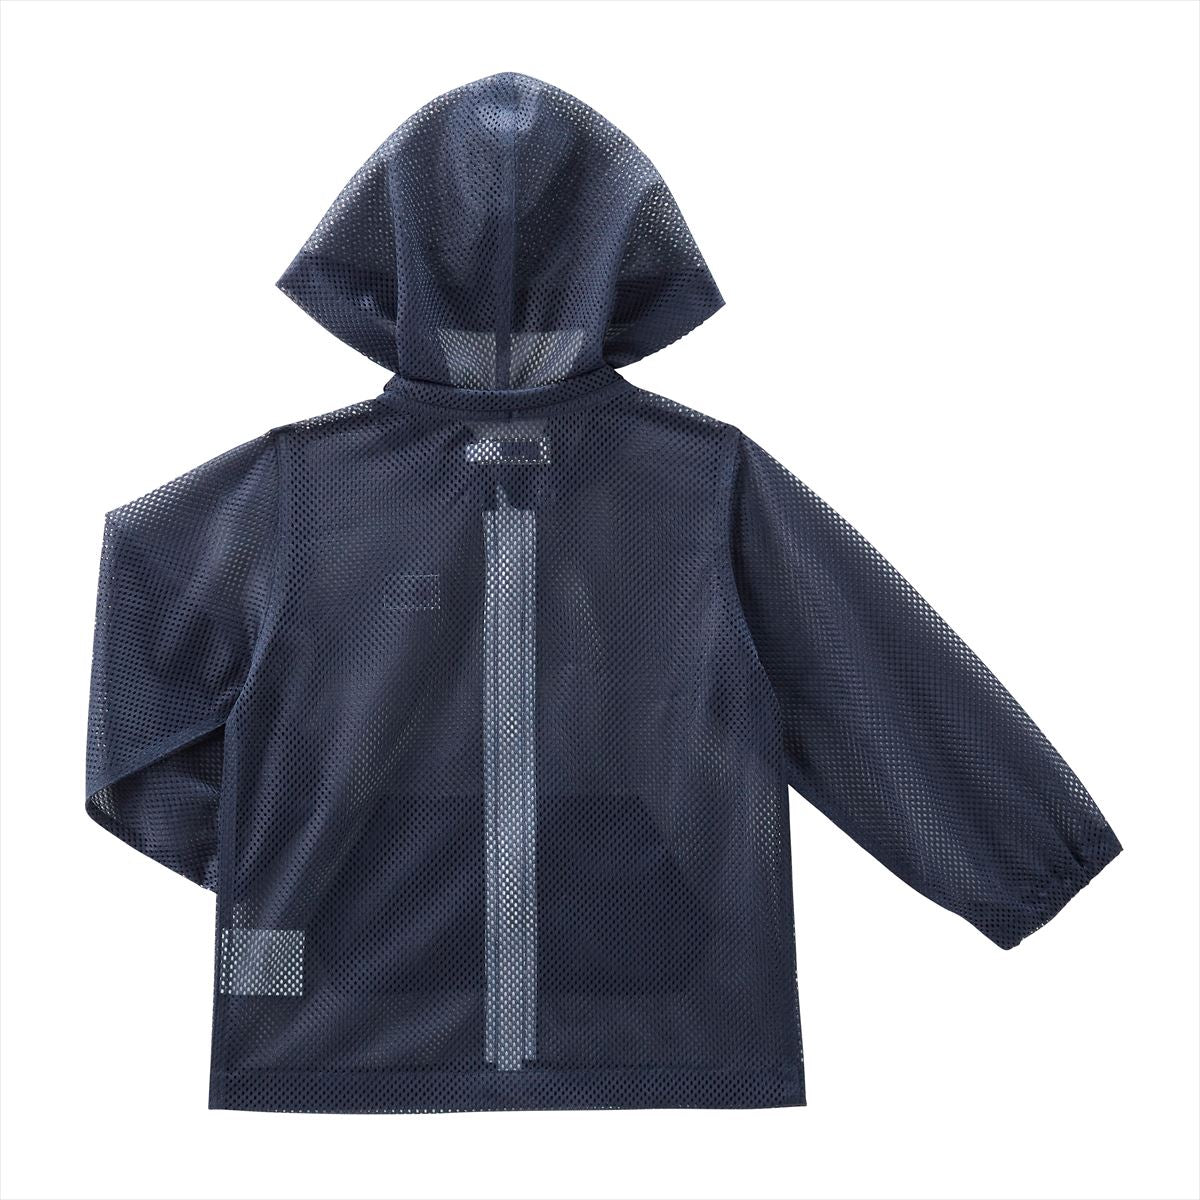 Mesh jacket with Insect Shield in Navy